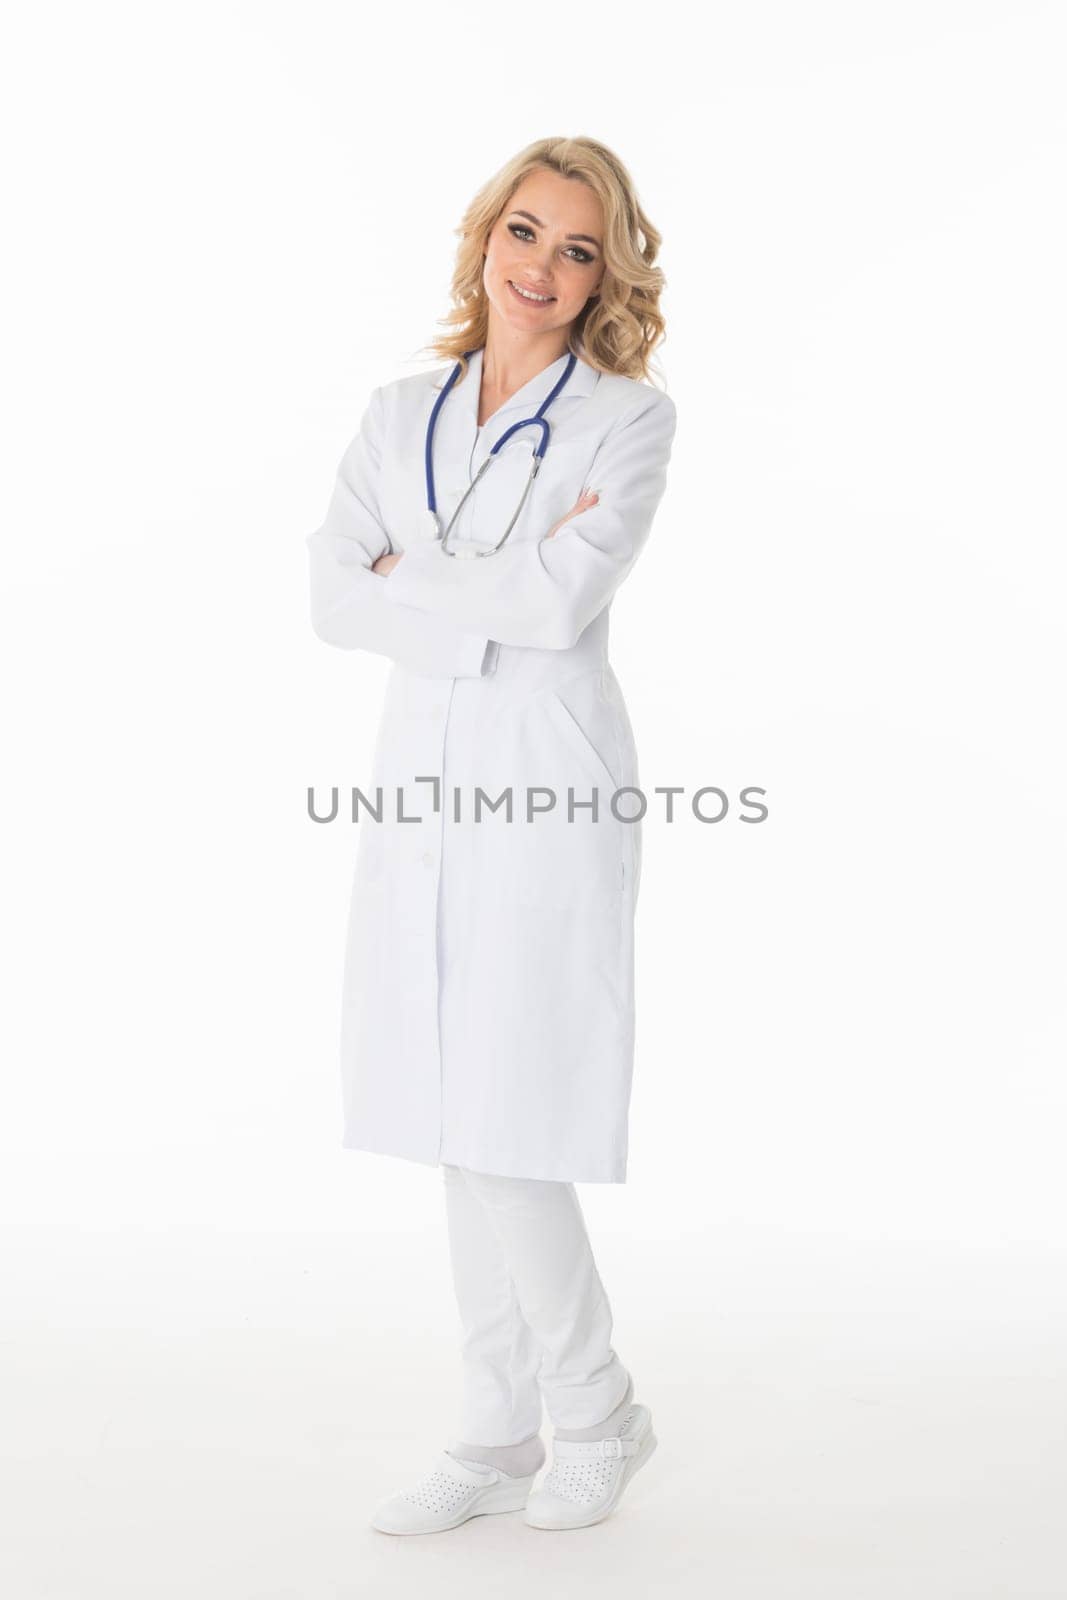 Female doctor with folder by Yellowj